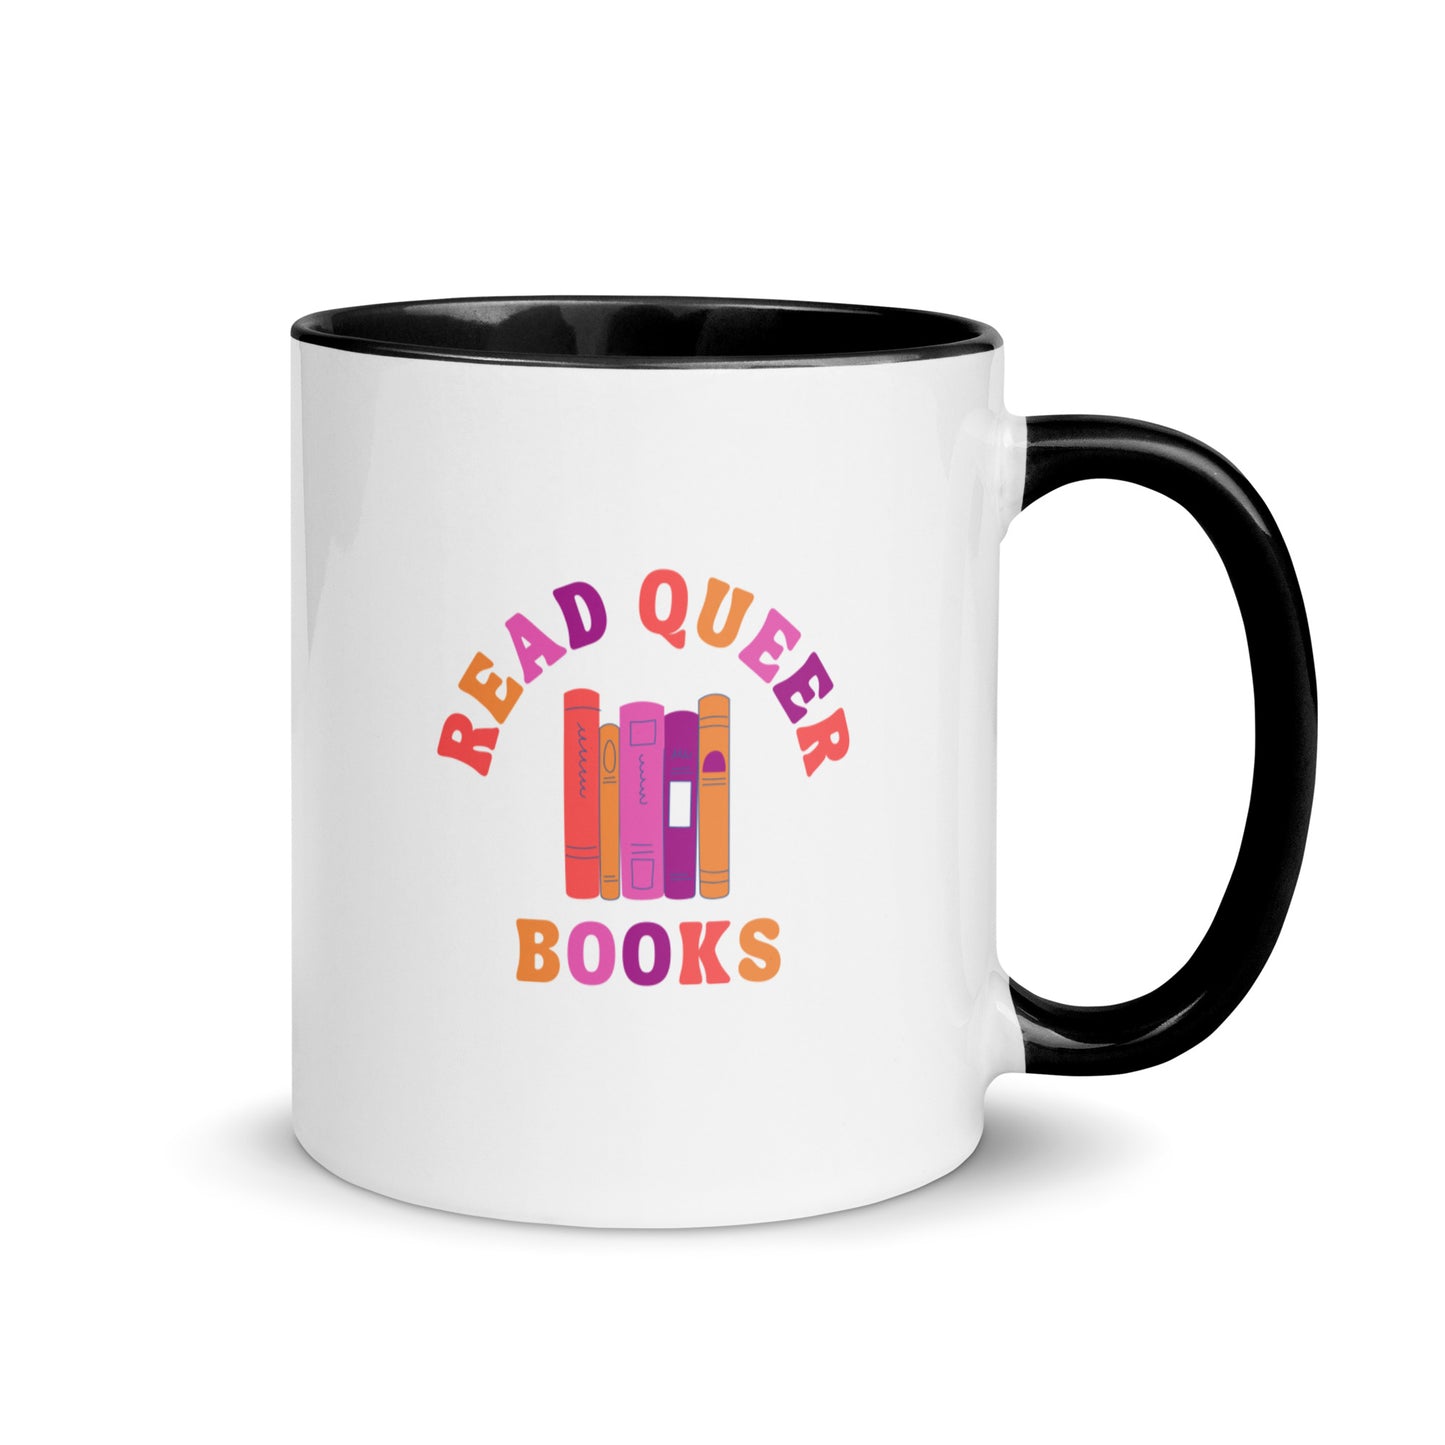 Read Queer Books (Lesbian Colors) Mug with Color Inside